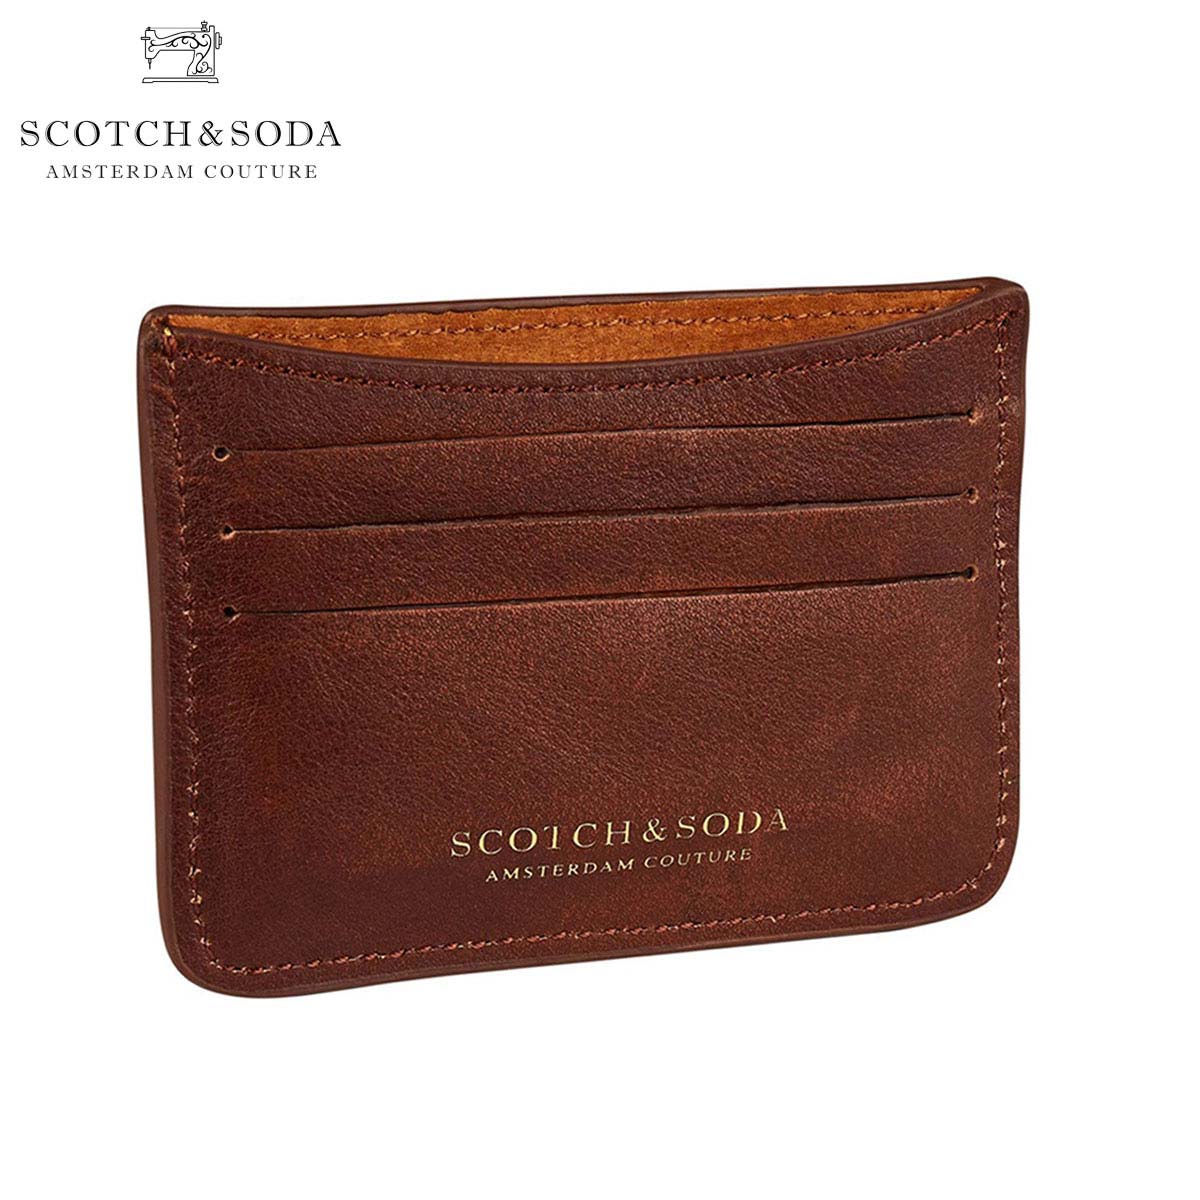 XRb`Ah\[_ SCOTCHSODA K̔X J[hP[X CLASSIC LEATHER AND SUEDE CARD HOLDER 145731 0007 68504 BROWN